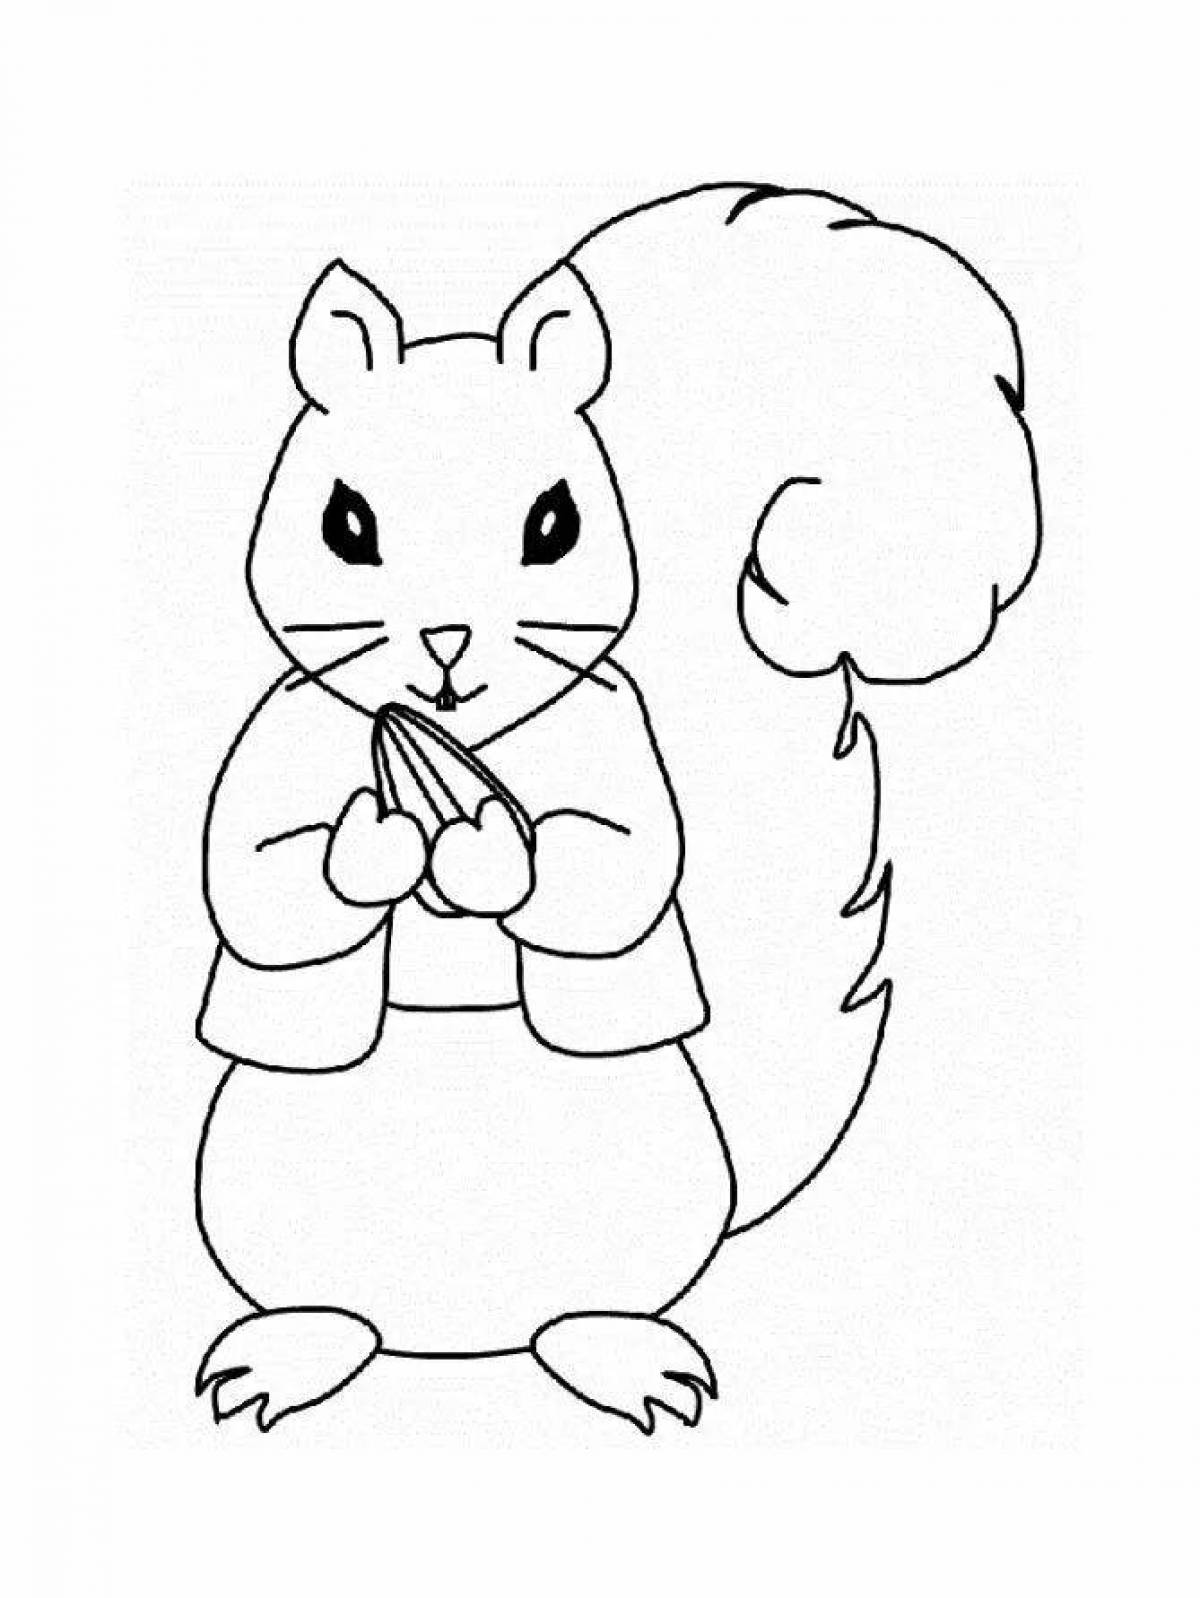 Smiling squirrel coloring page